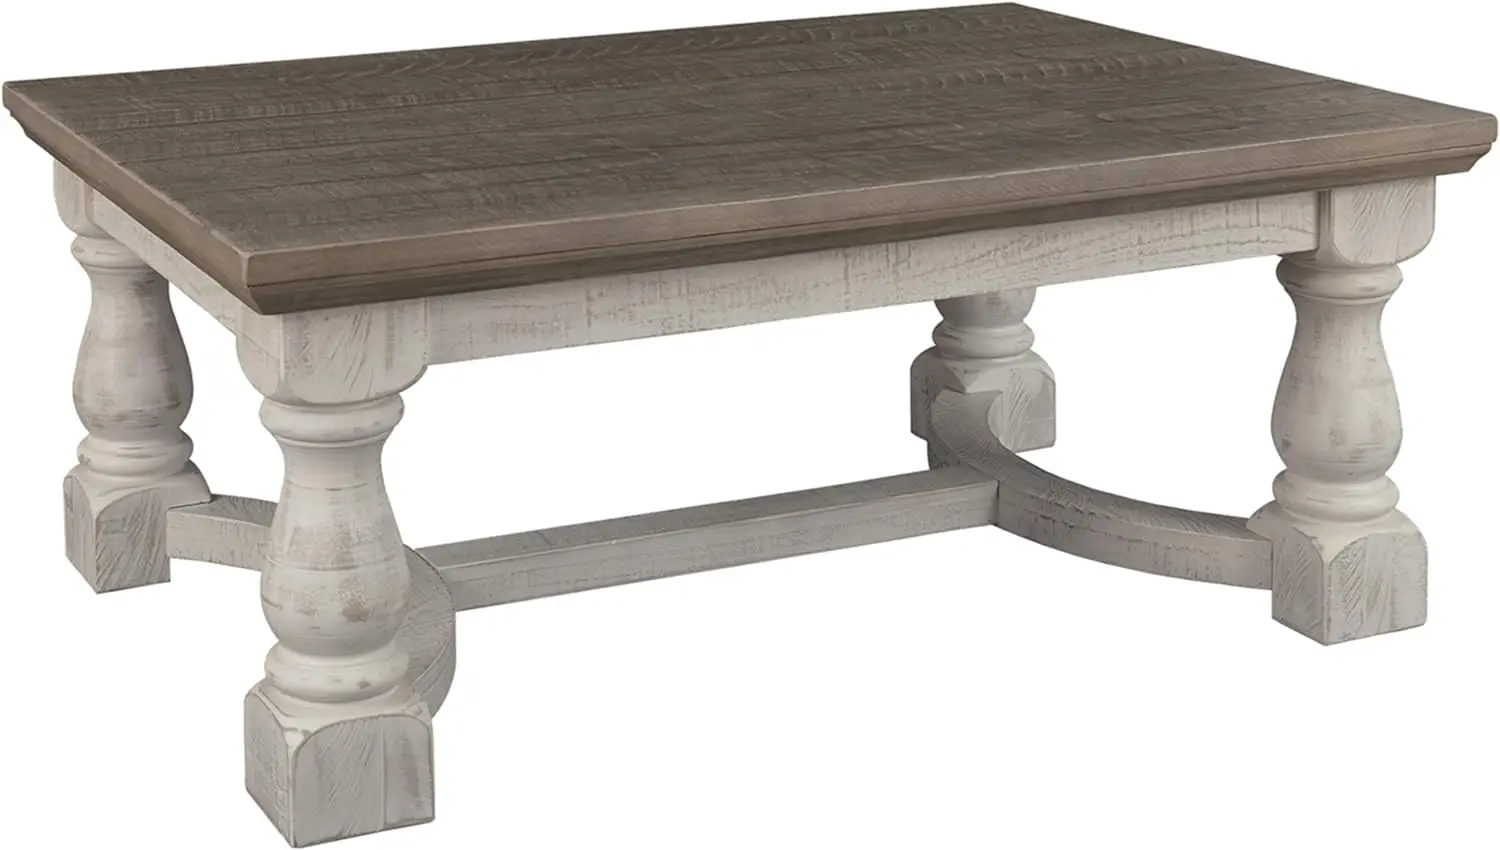 

Signature Design by Ashley Havalance Farmhouse Rectangular Coffee Table, Gray & White with Weathered Finish